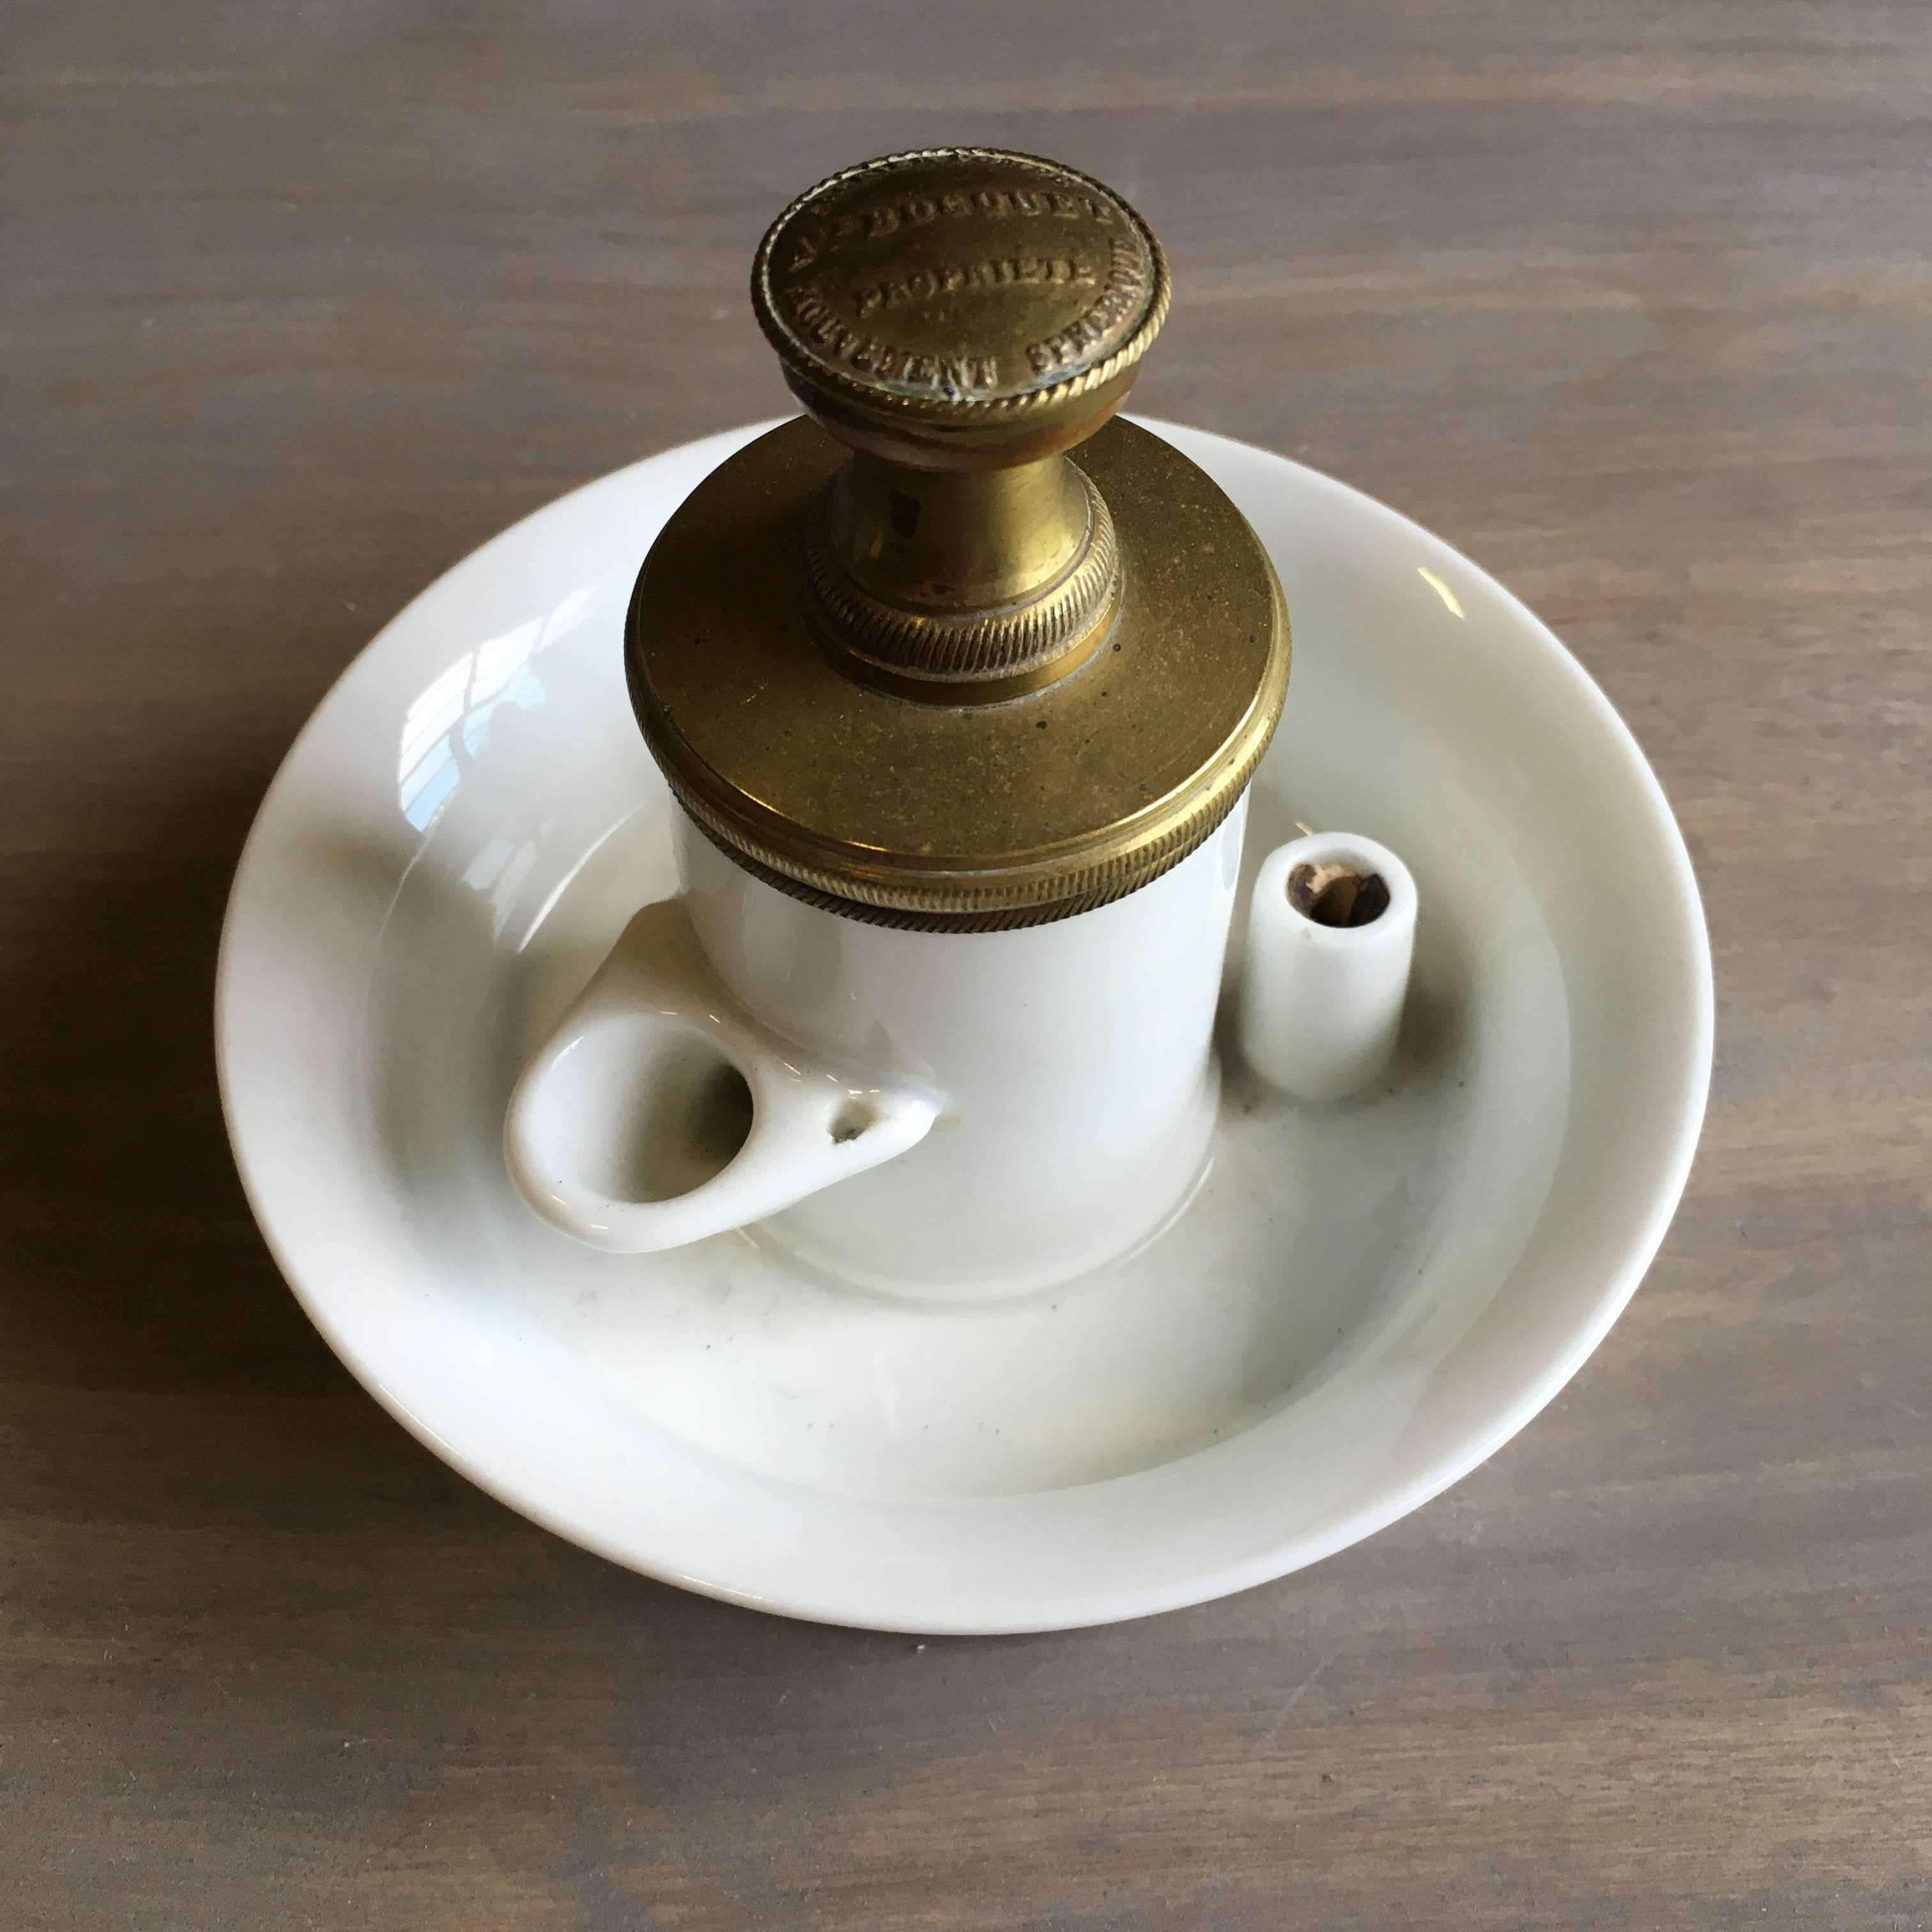 A French Empire period porcelain and brass gravity feed inkwell, complete with all internal parts, circa 1810. Signed 